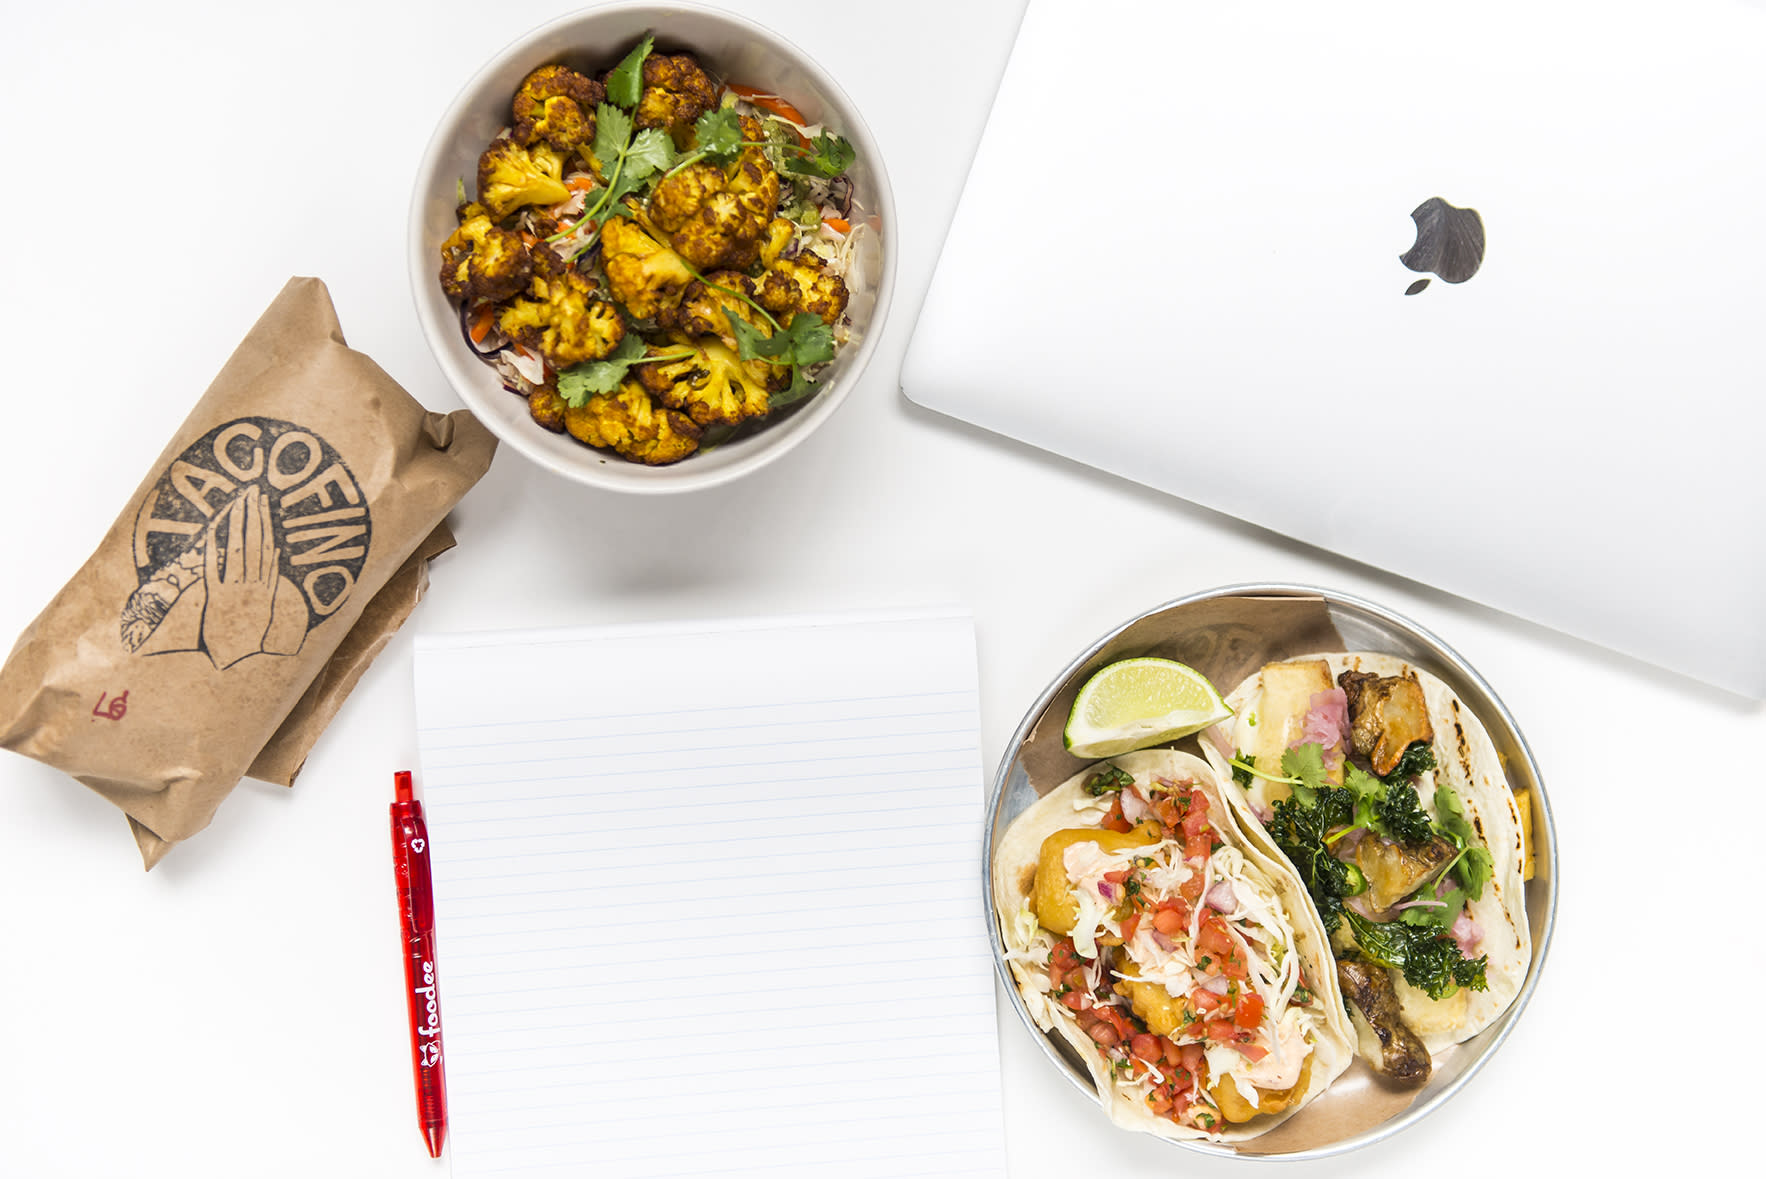 Foodee's Industry Leading Meal Planning Service For Businesses Joins Sodexo To Expand Across The U.S. And Canada